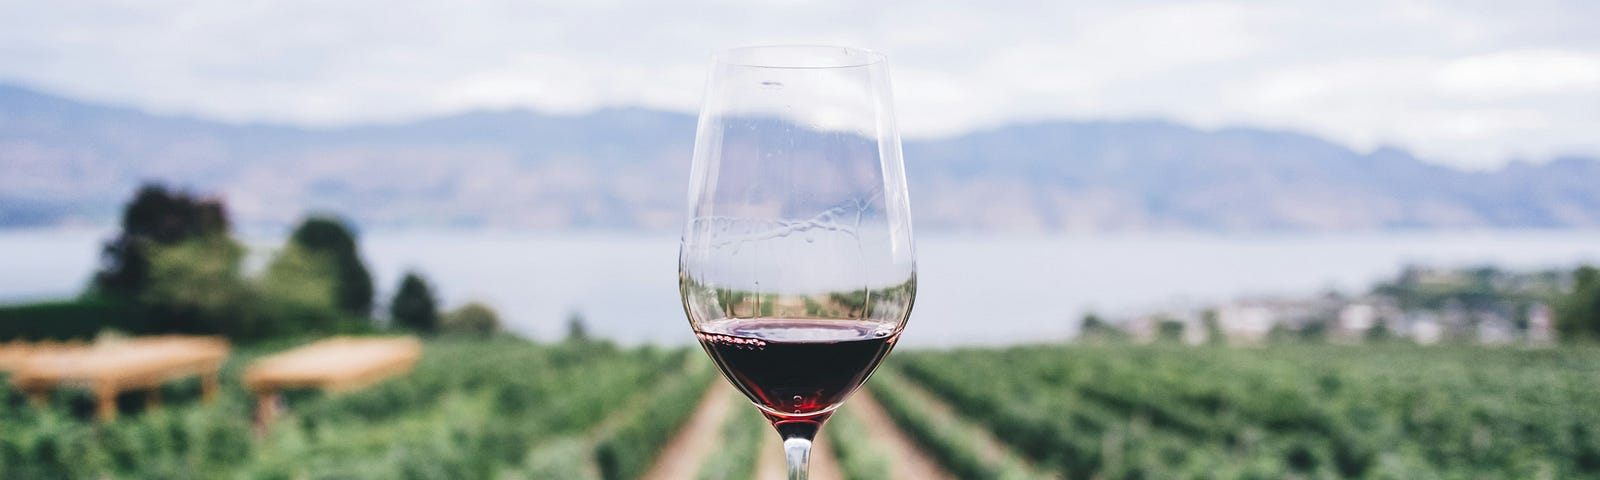 Glass of wine with vineyard in the background